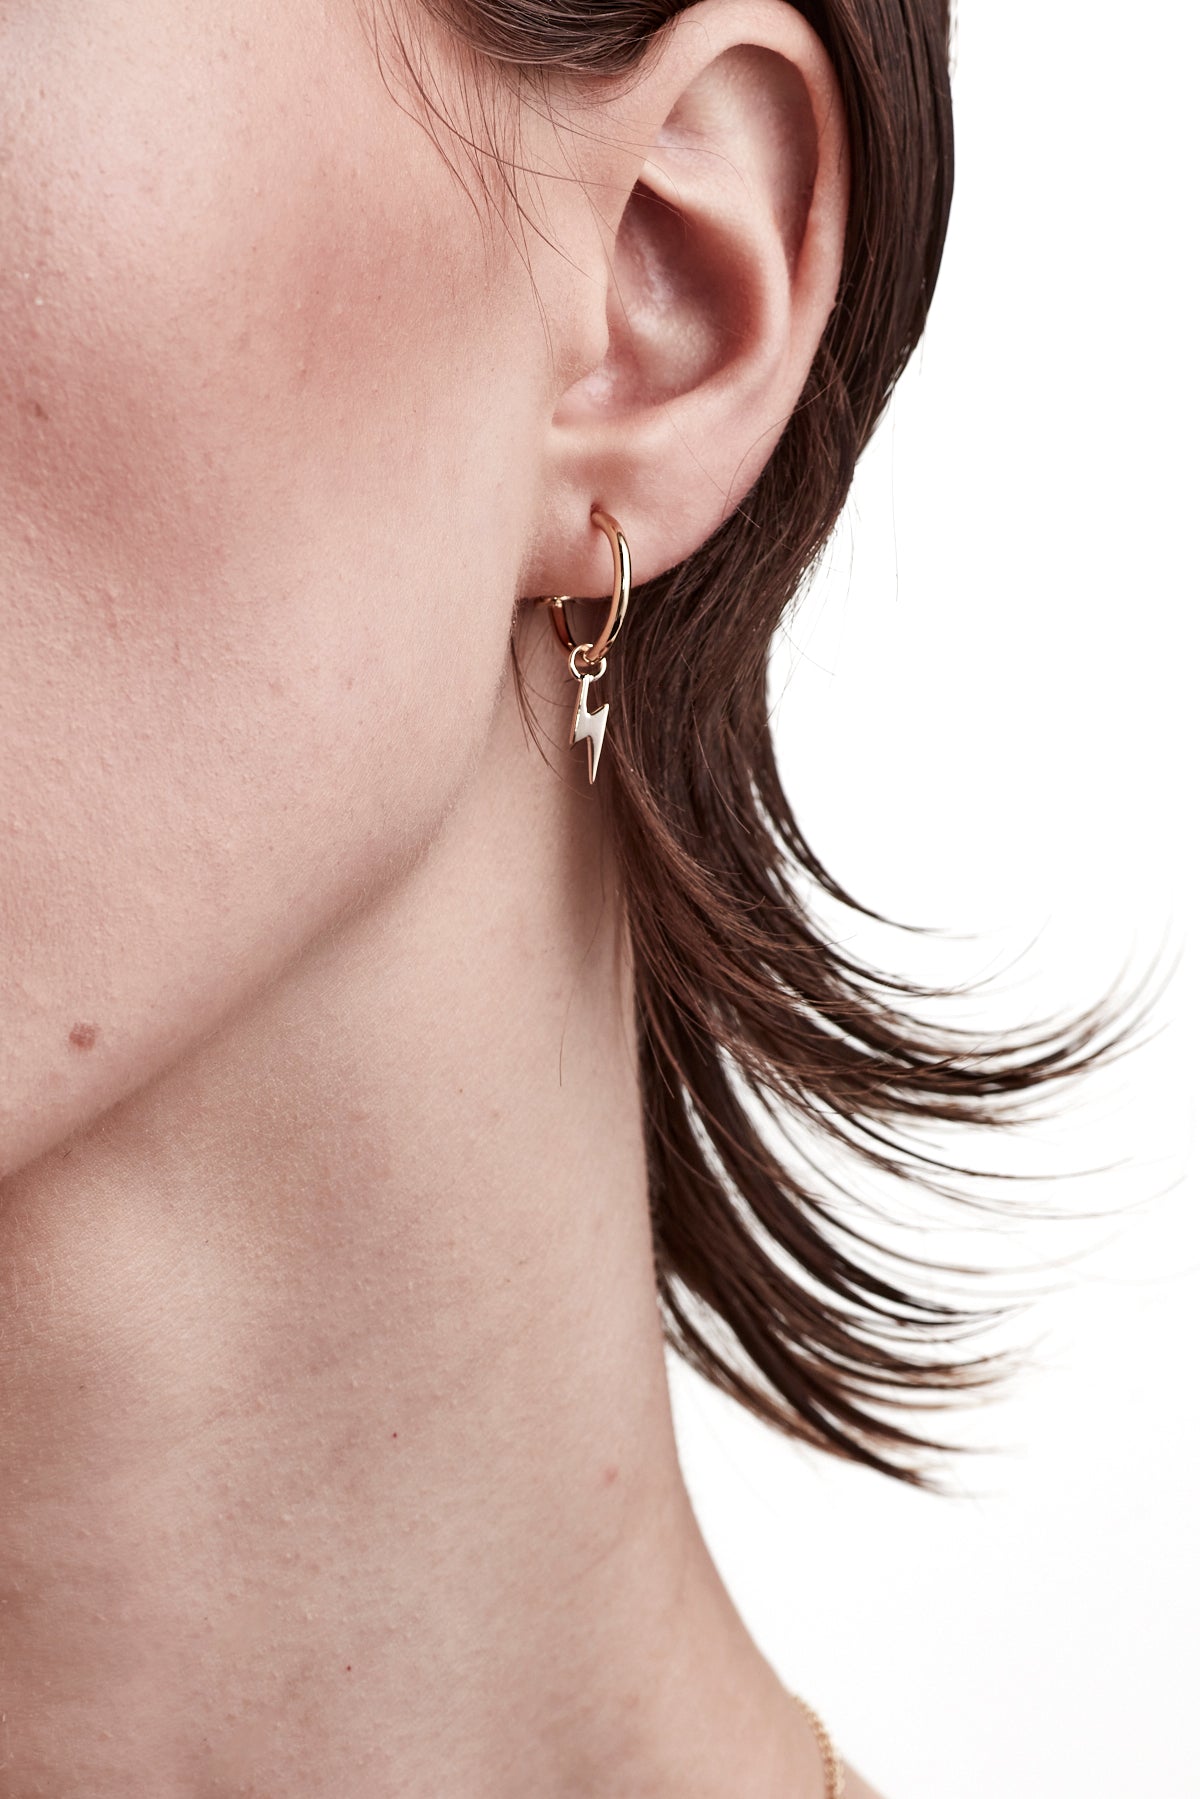 STOLEN GIRLFRIENDS CLUB BOLT ANCHOR SLEEPER  The Stolen Girlfriends Club Bolt Anchor Sleepers are gorgeous half hoop stud-style earrings, each suspending cute mini lightening bolt charms.  Crafted using gold plating, these little lightening bolts are great for every day wear.  Pair with other studs, or match with the matching I'll Be Lightening Earrings.      Half hoop stud-style earrings